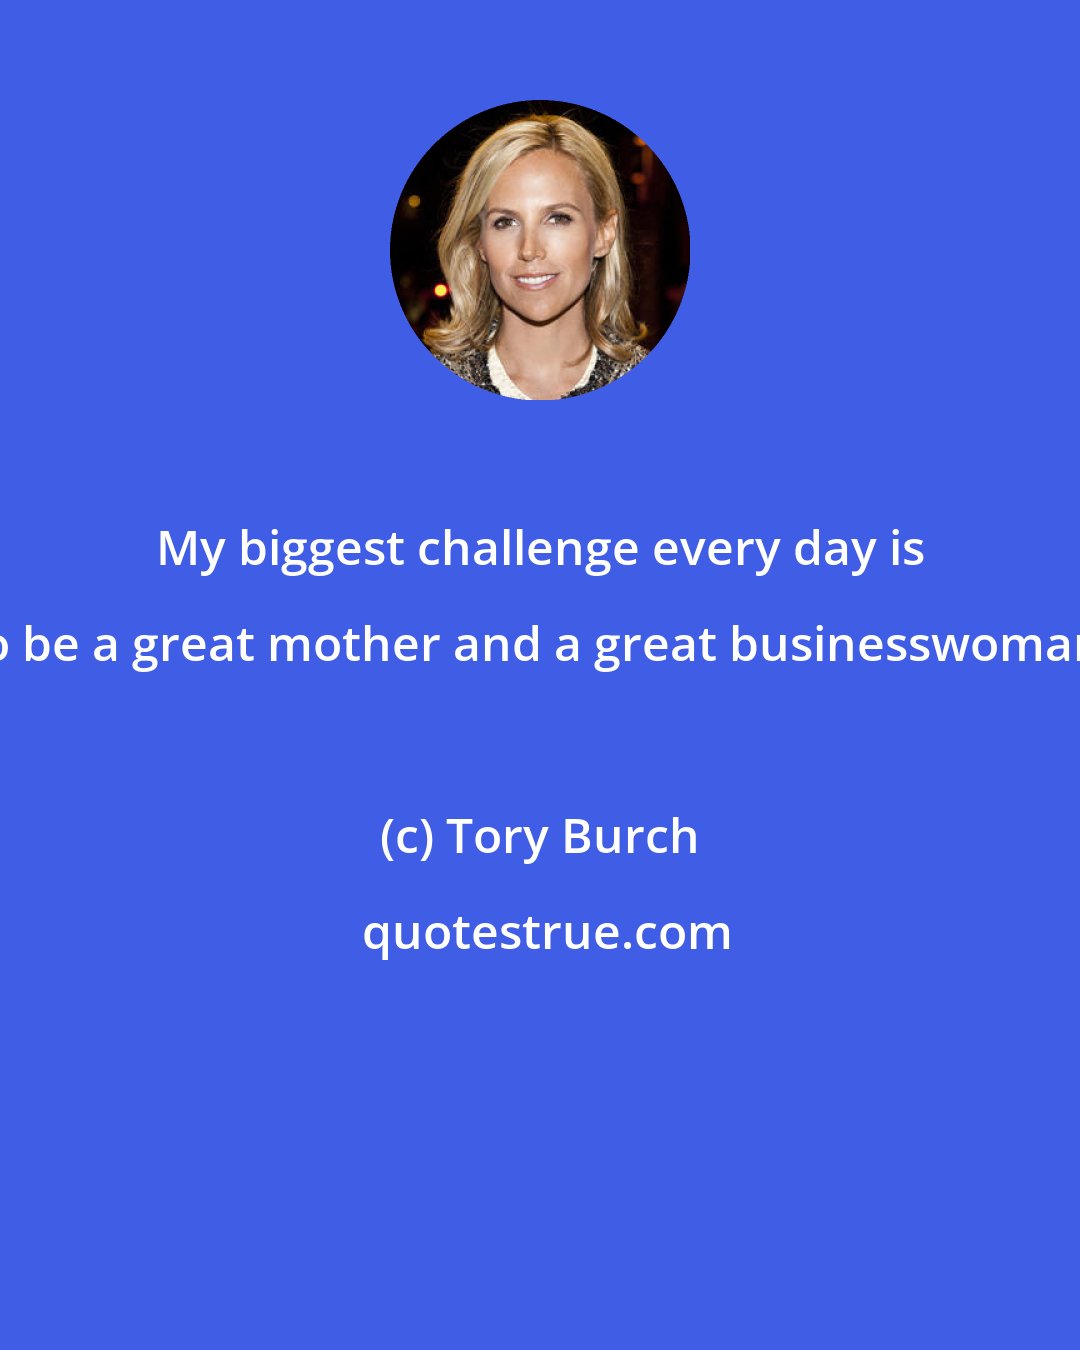 Tory Burch: My biggest challenge every day is to be a great mother and a great businesswoman.